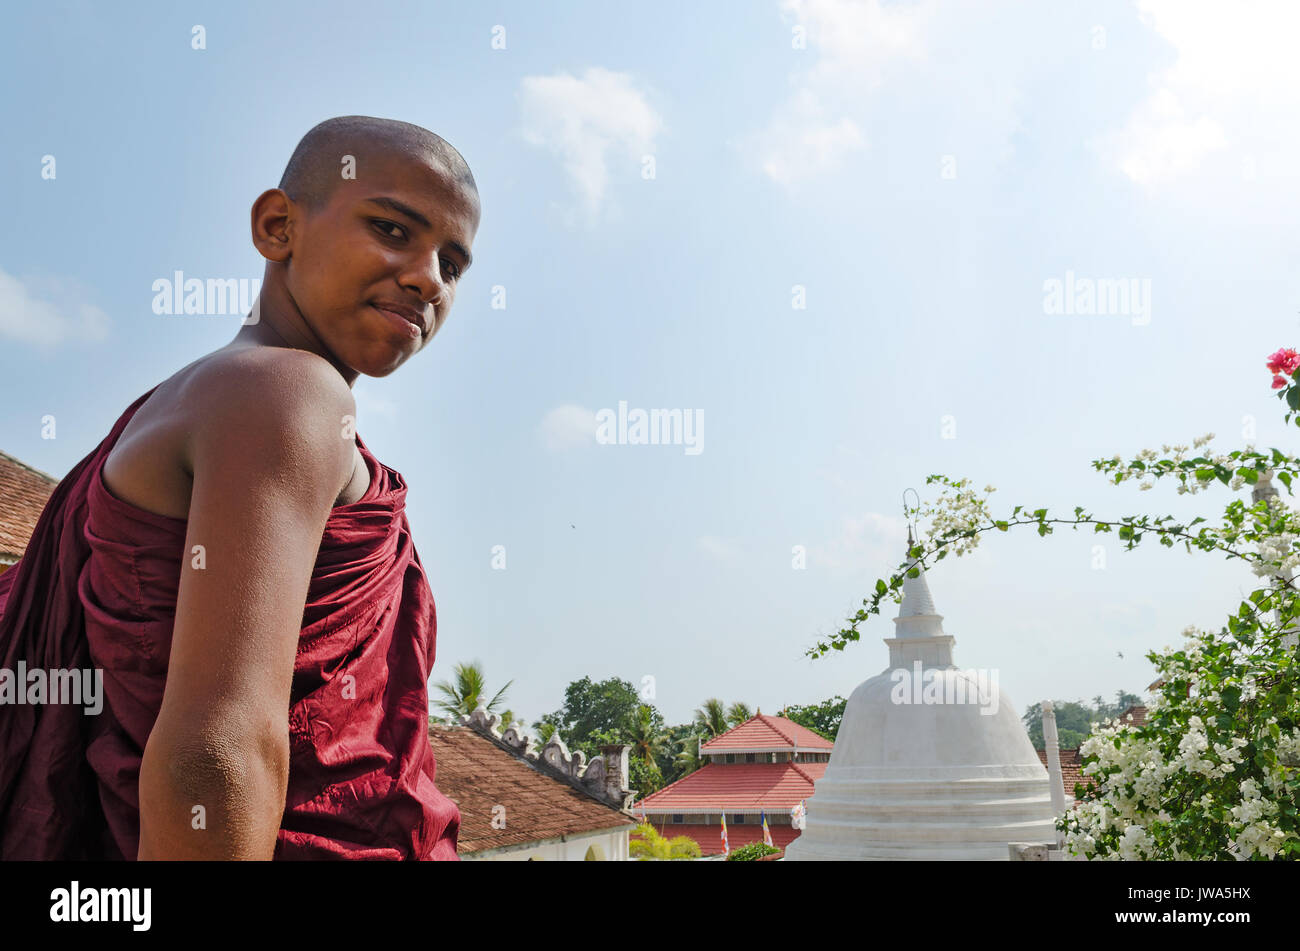 Dickwella, Sri Lanka, 04-15-2017: Young Buddhist monk on the background of a Buddhist pagoda looks at the camera Stock Photo